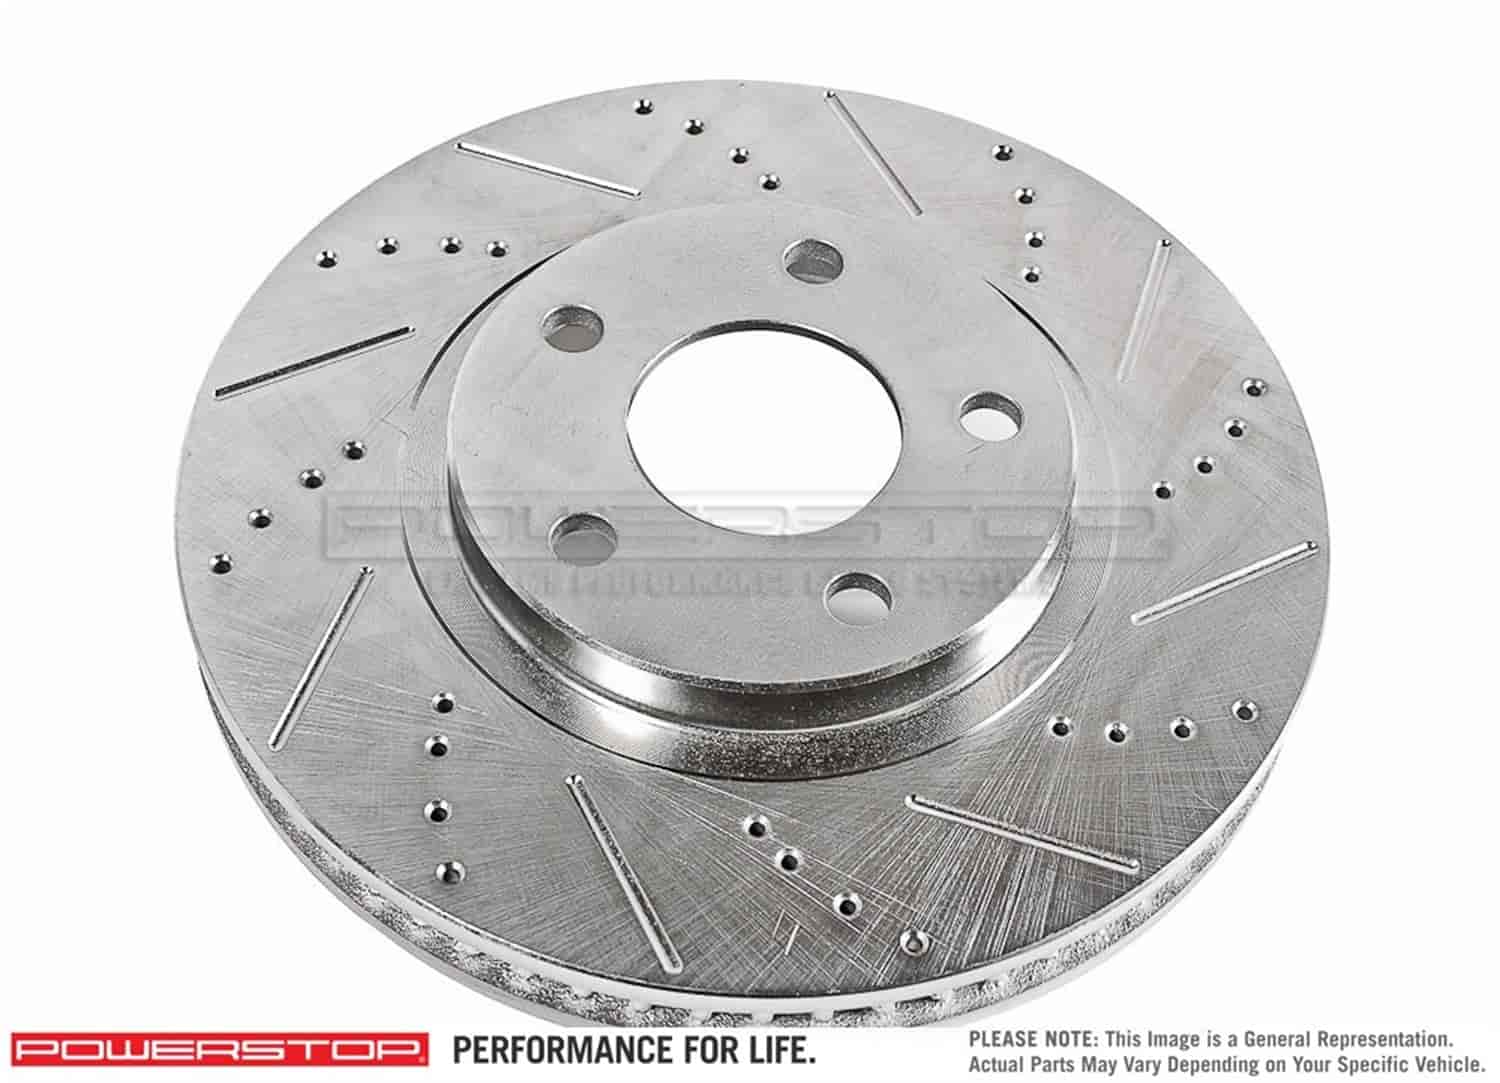 Extreme Performance Drilled And Slotted Brake Rotor Fits Select Late Model Dodge Trucks [Rear Right/Passenger Side]